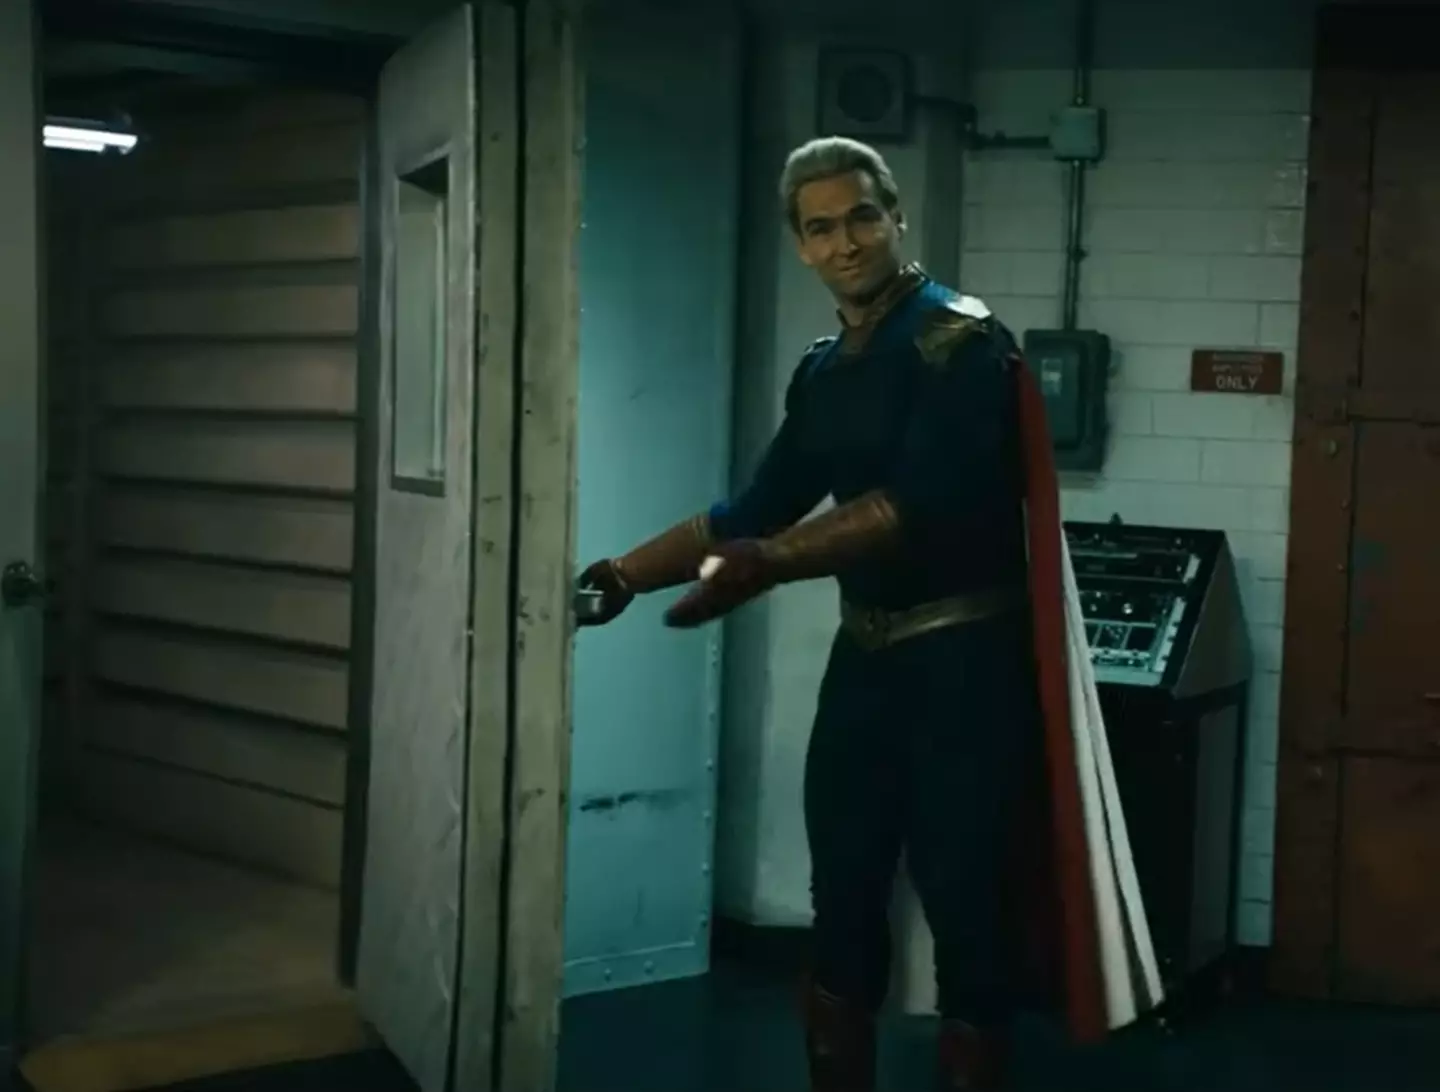 You wouldn't think a scene where Homelander makes someone get into an oven would have people feeling sorry for him, but here we are. (Prime Video)